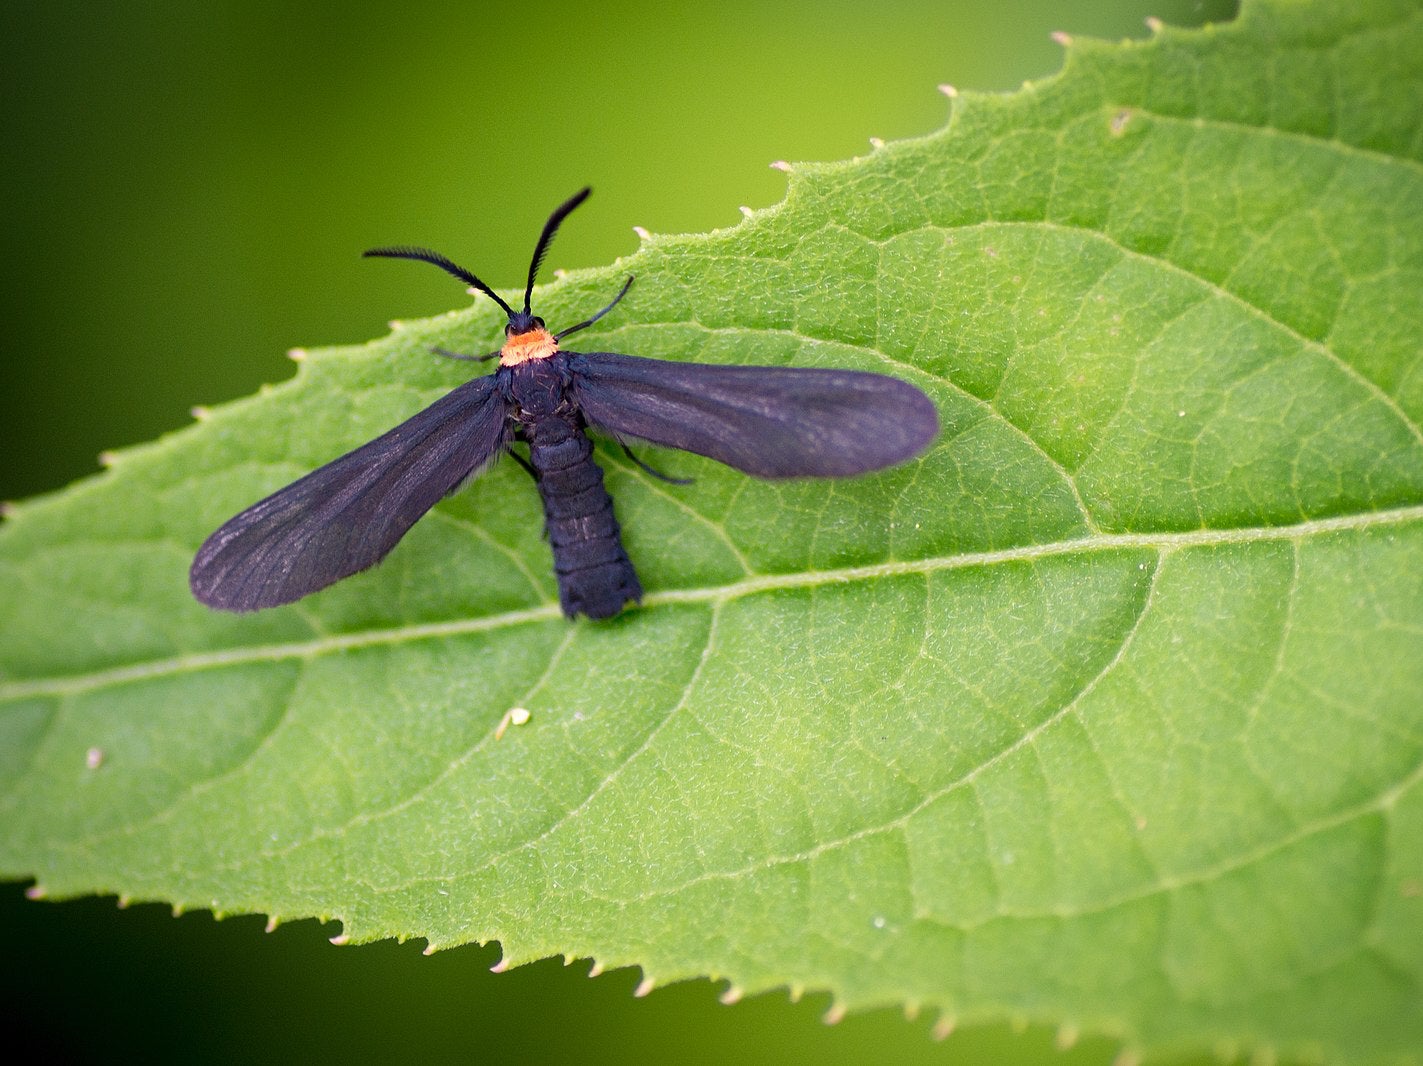 A grappleaf skeletonizer moth has been sighted in California, where it is an invasive species.